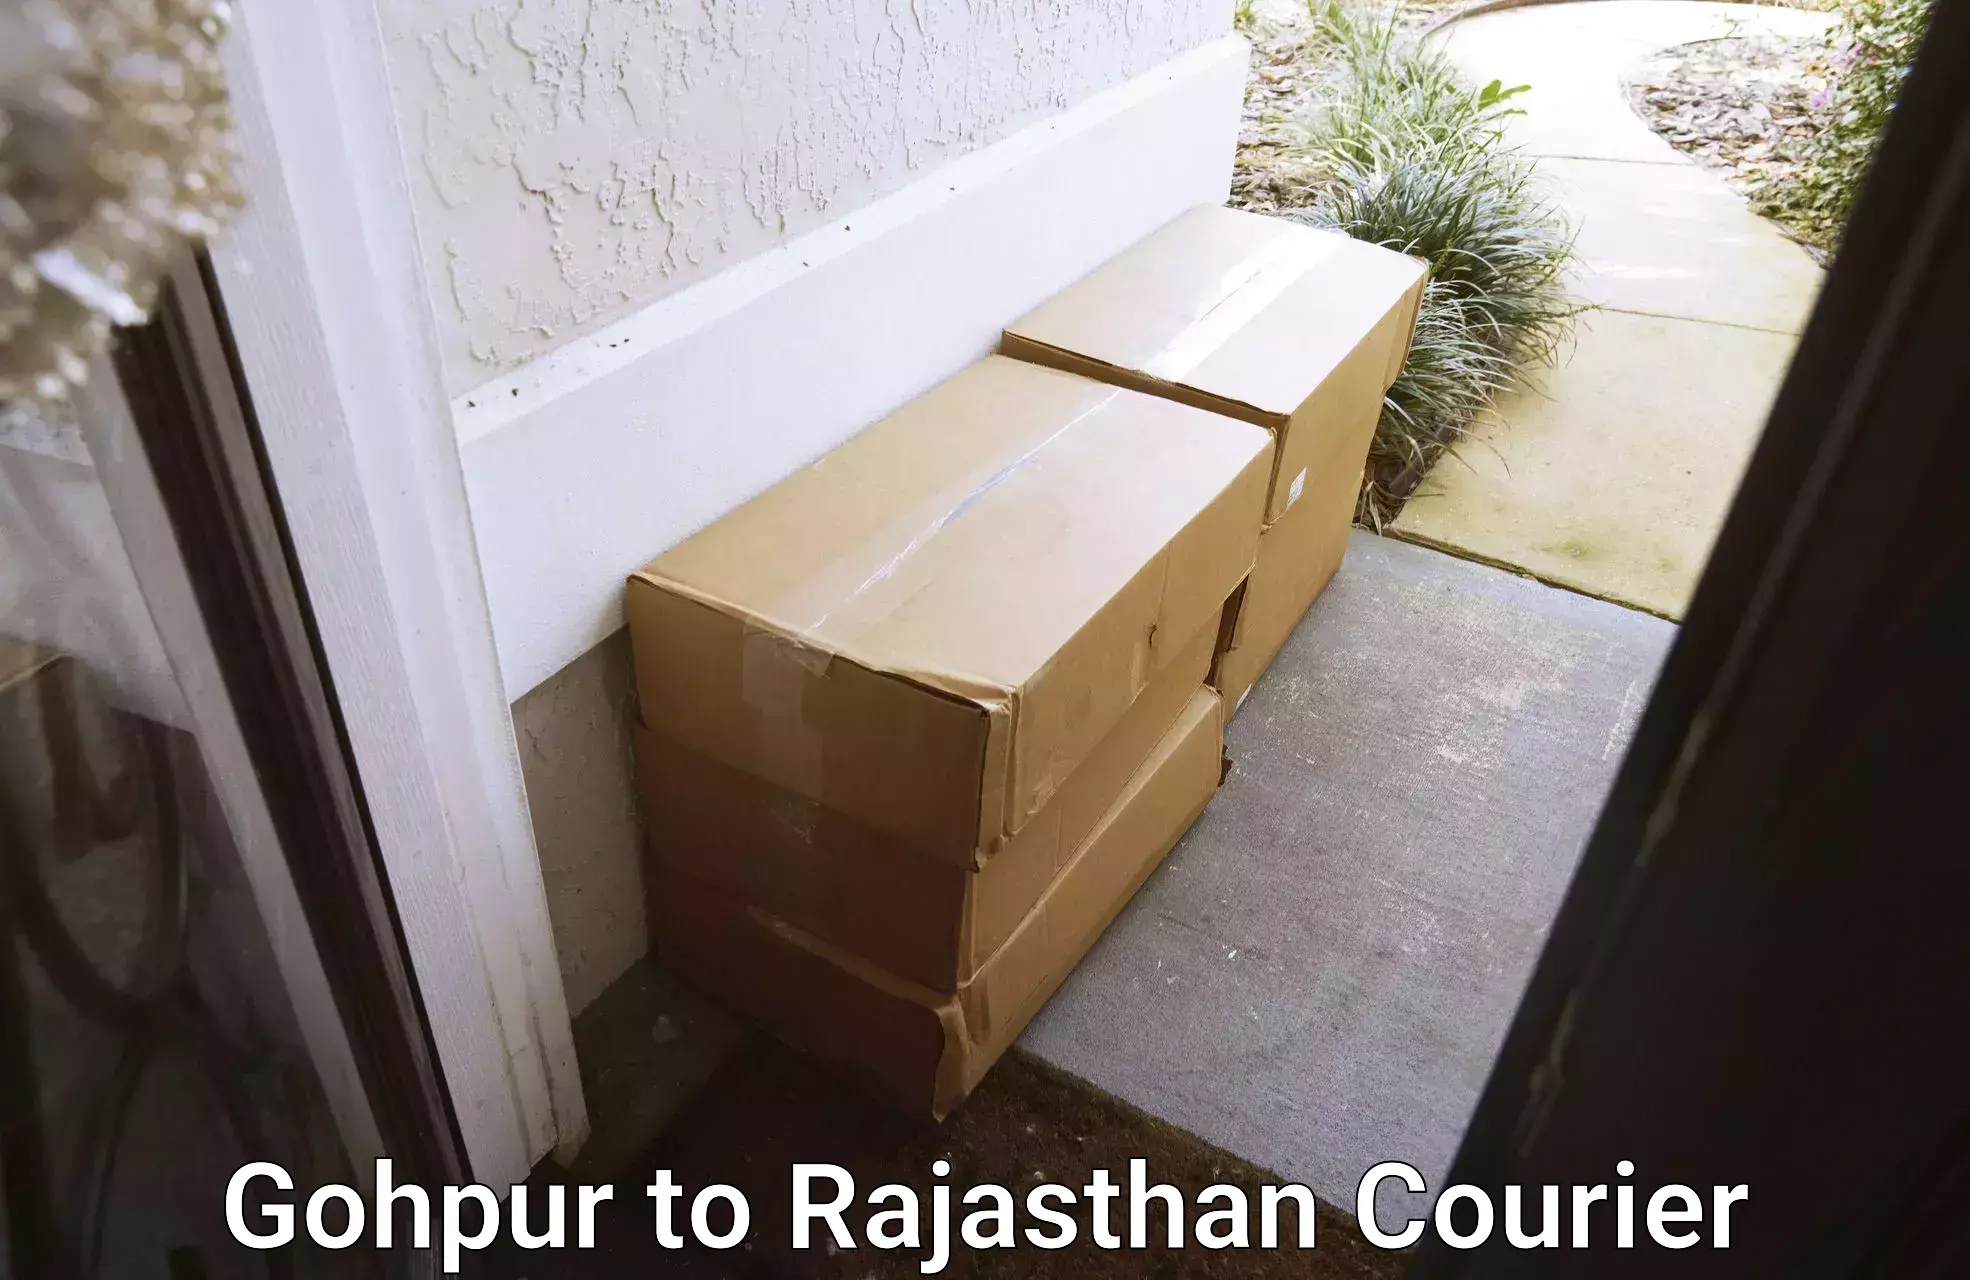 Personal courier services Gohpur to Jaipur